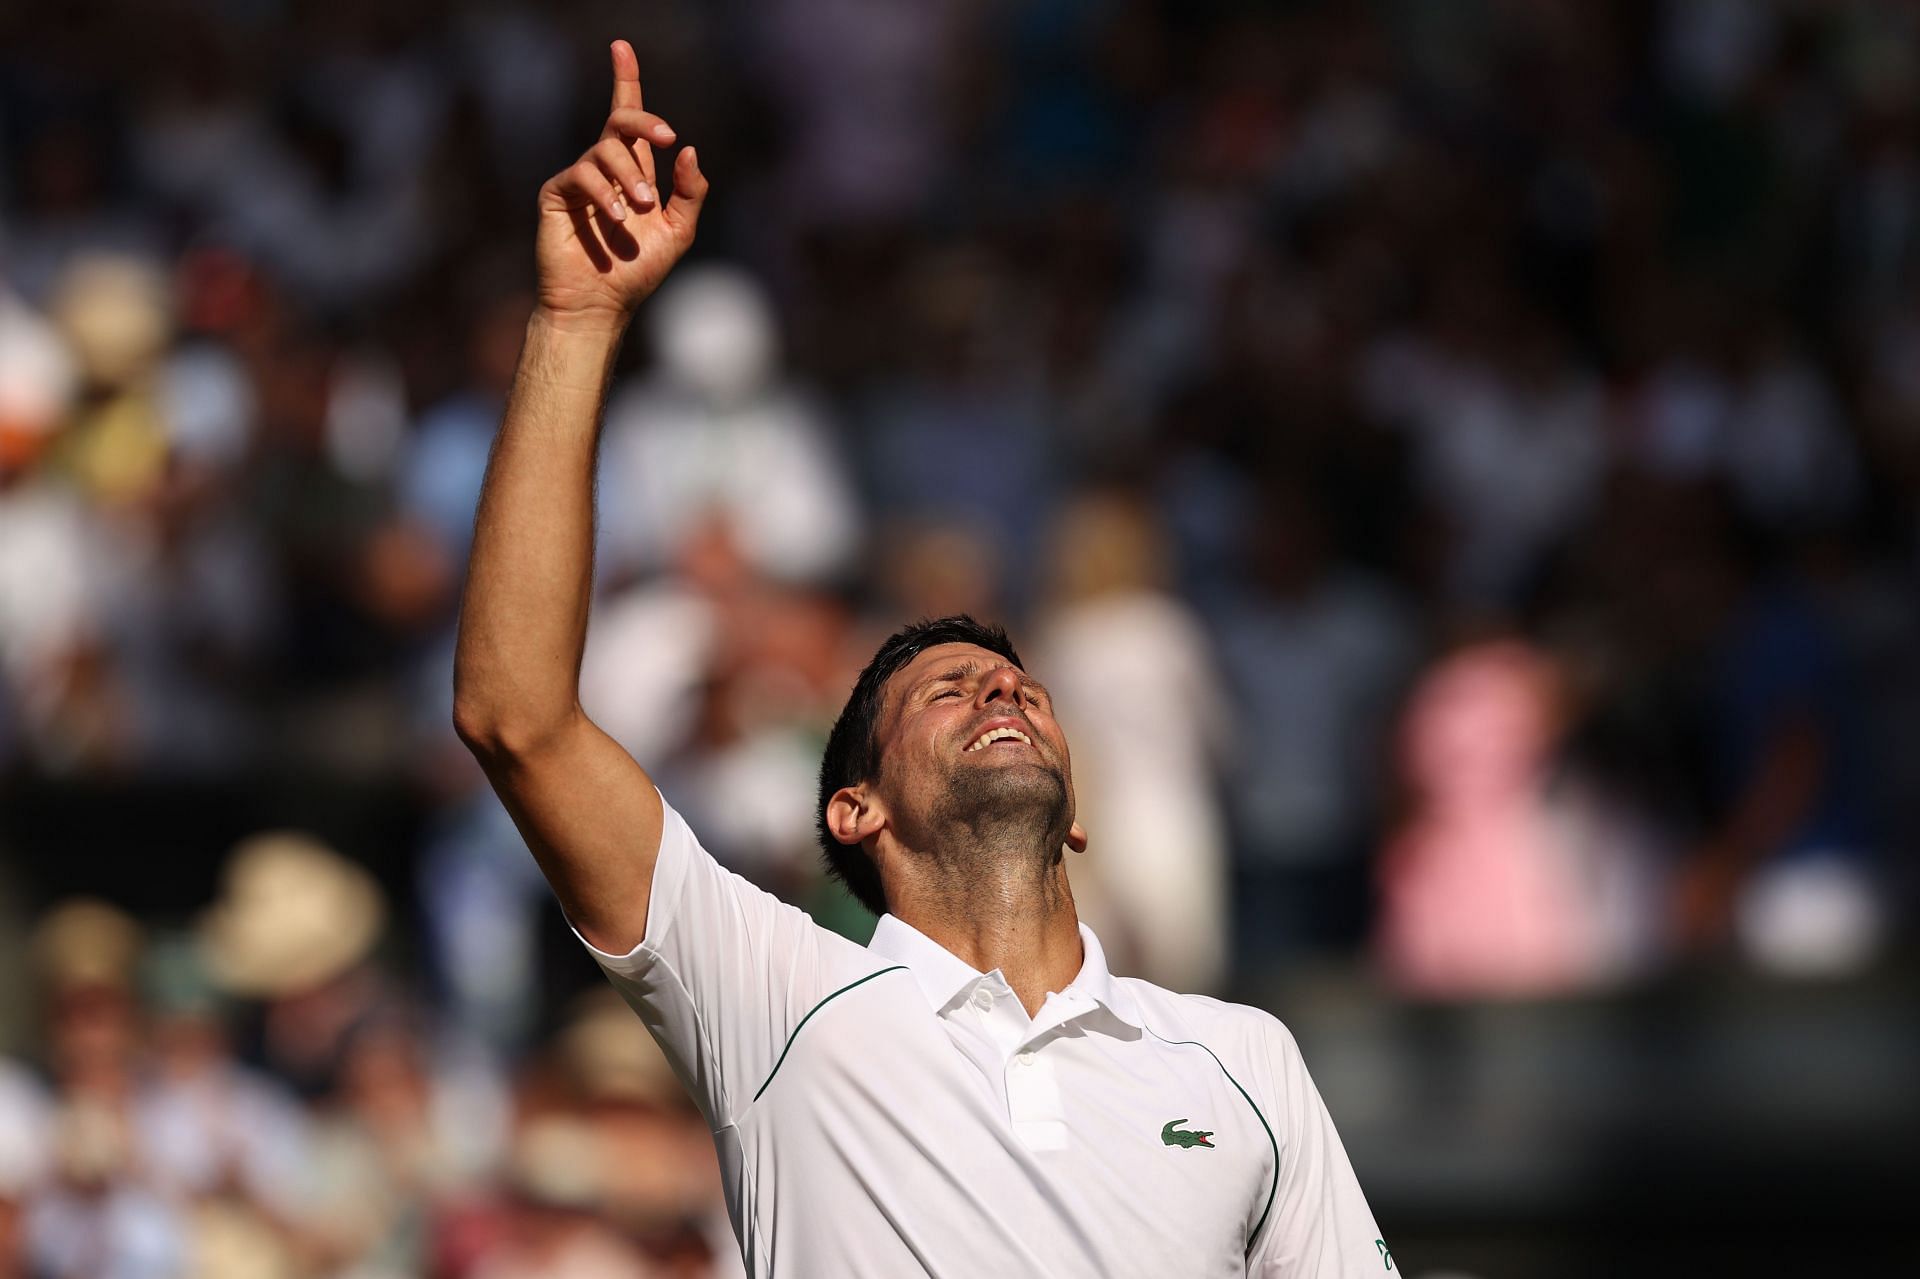 Novak Djokovic looks to the sky in relief after clinching the 2022 Wimvledon Championships title.